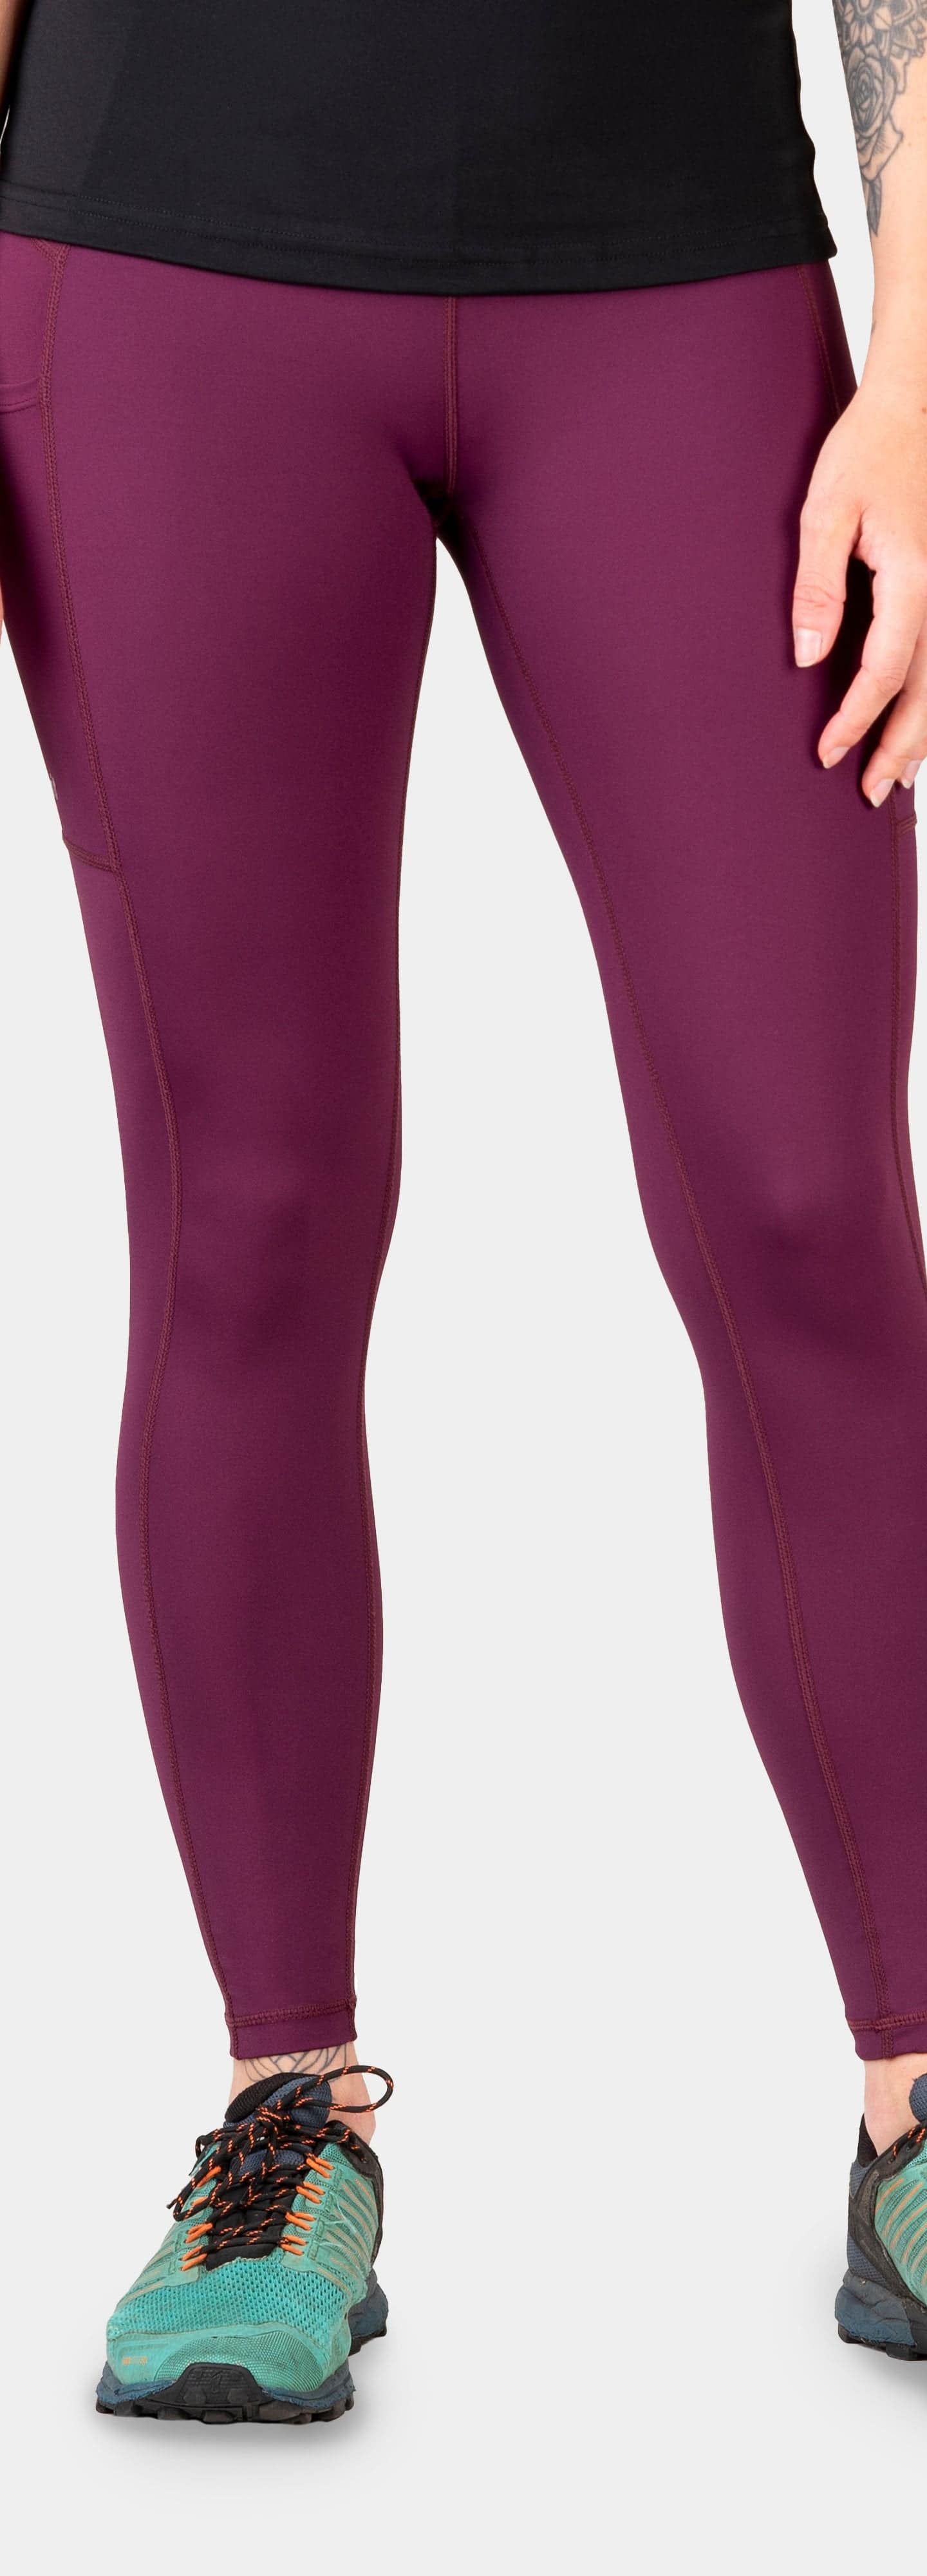 Mello Tight Women's Hiking and Climbing Tights